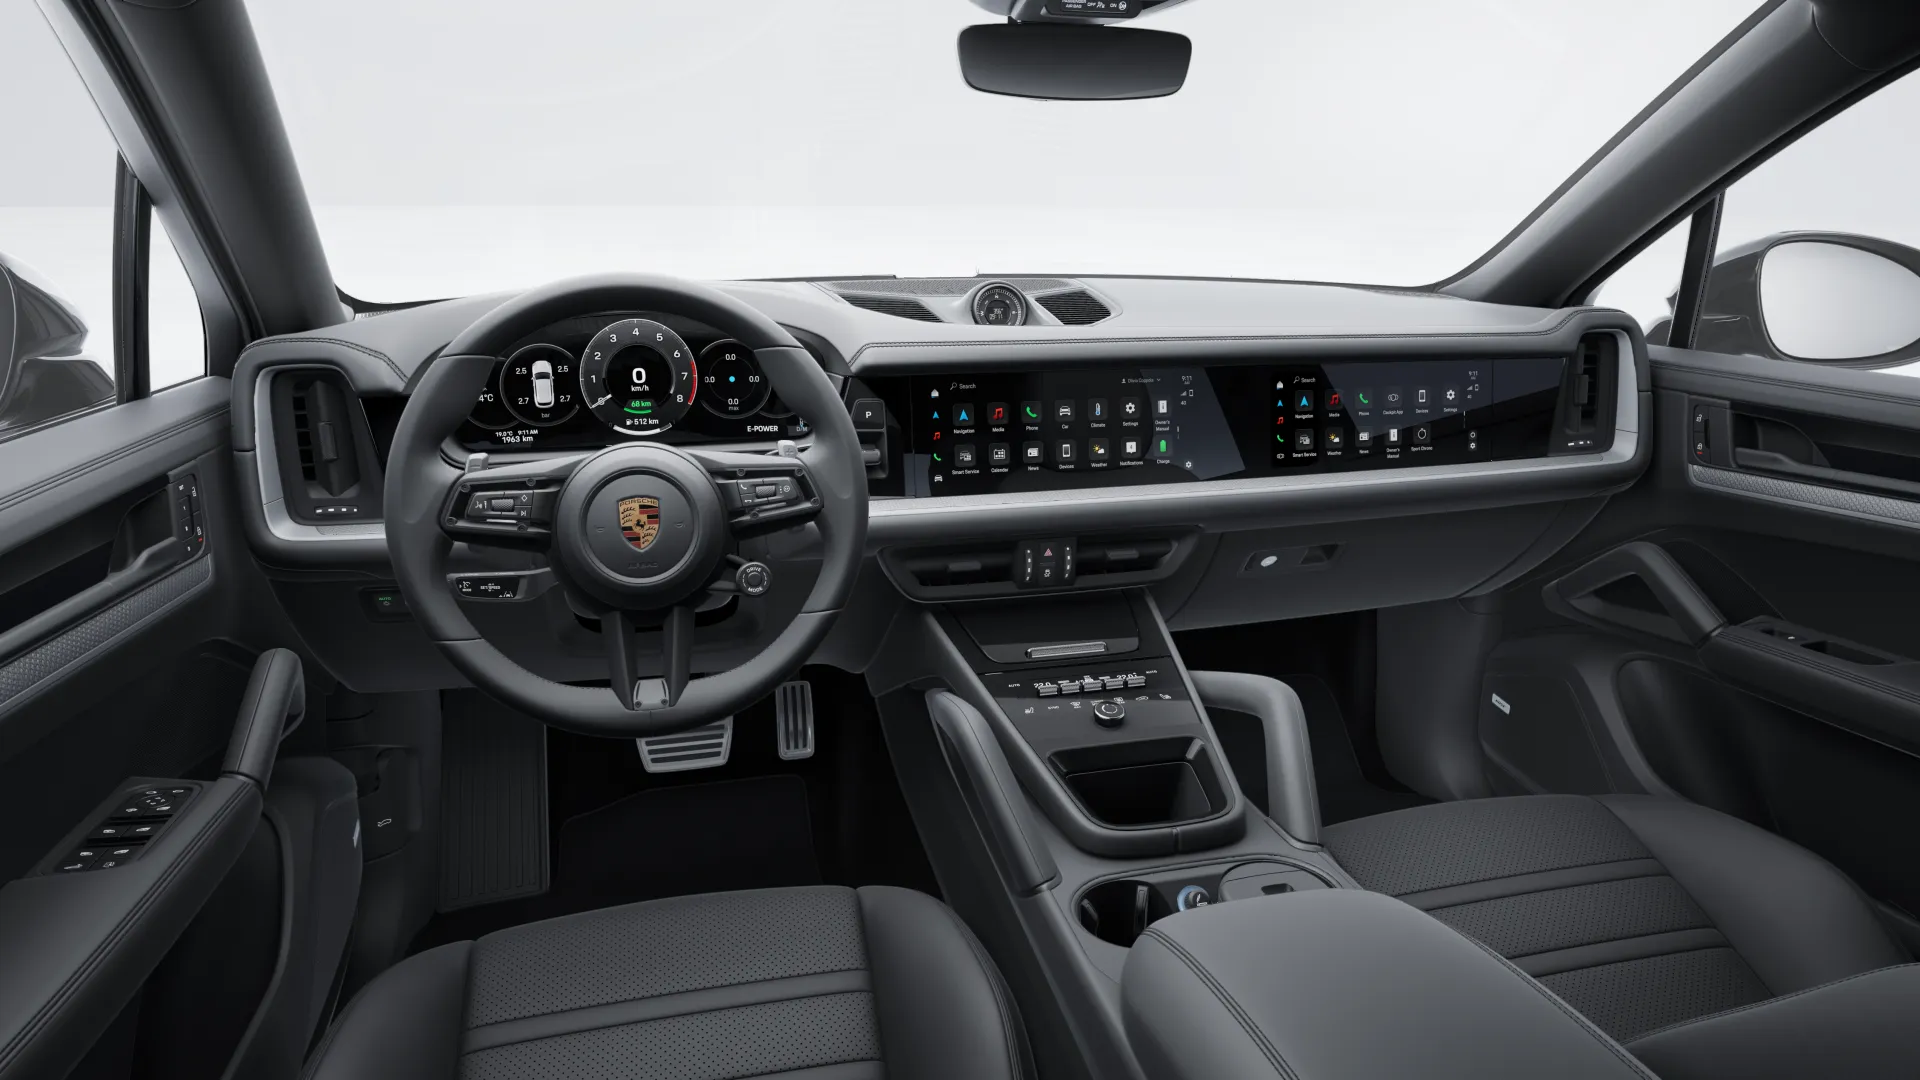 Interior view of Cayenne S E-Hybrid Coupe